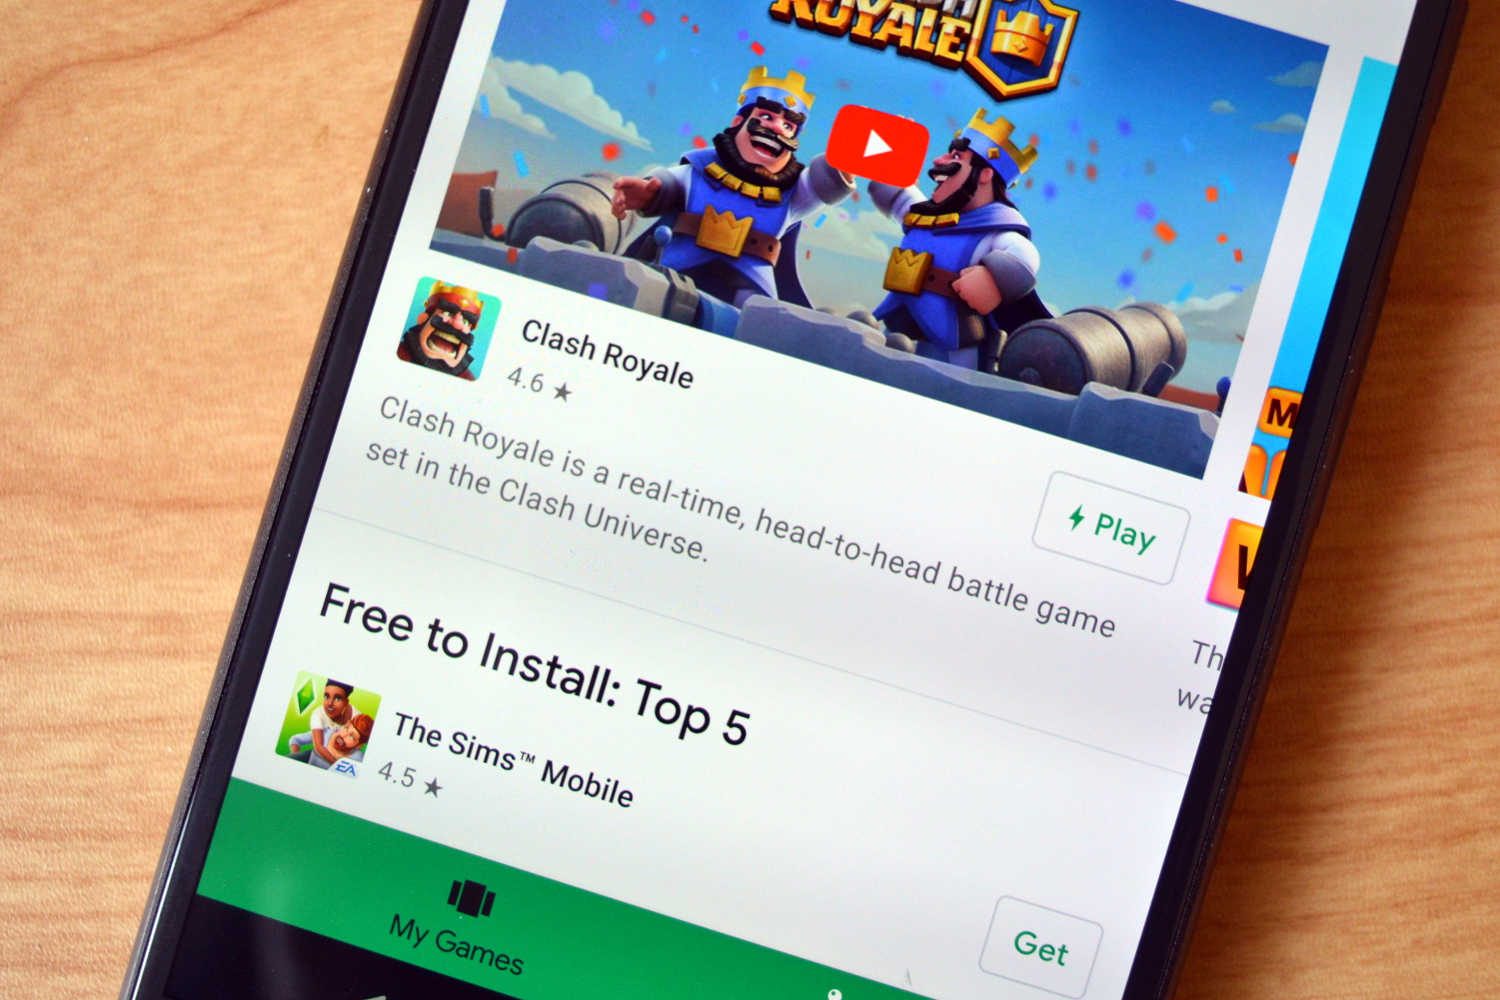 88% of Google Play Game Downloads Come From Search and Browse, 8